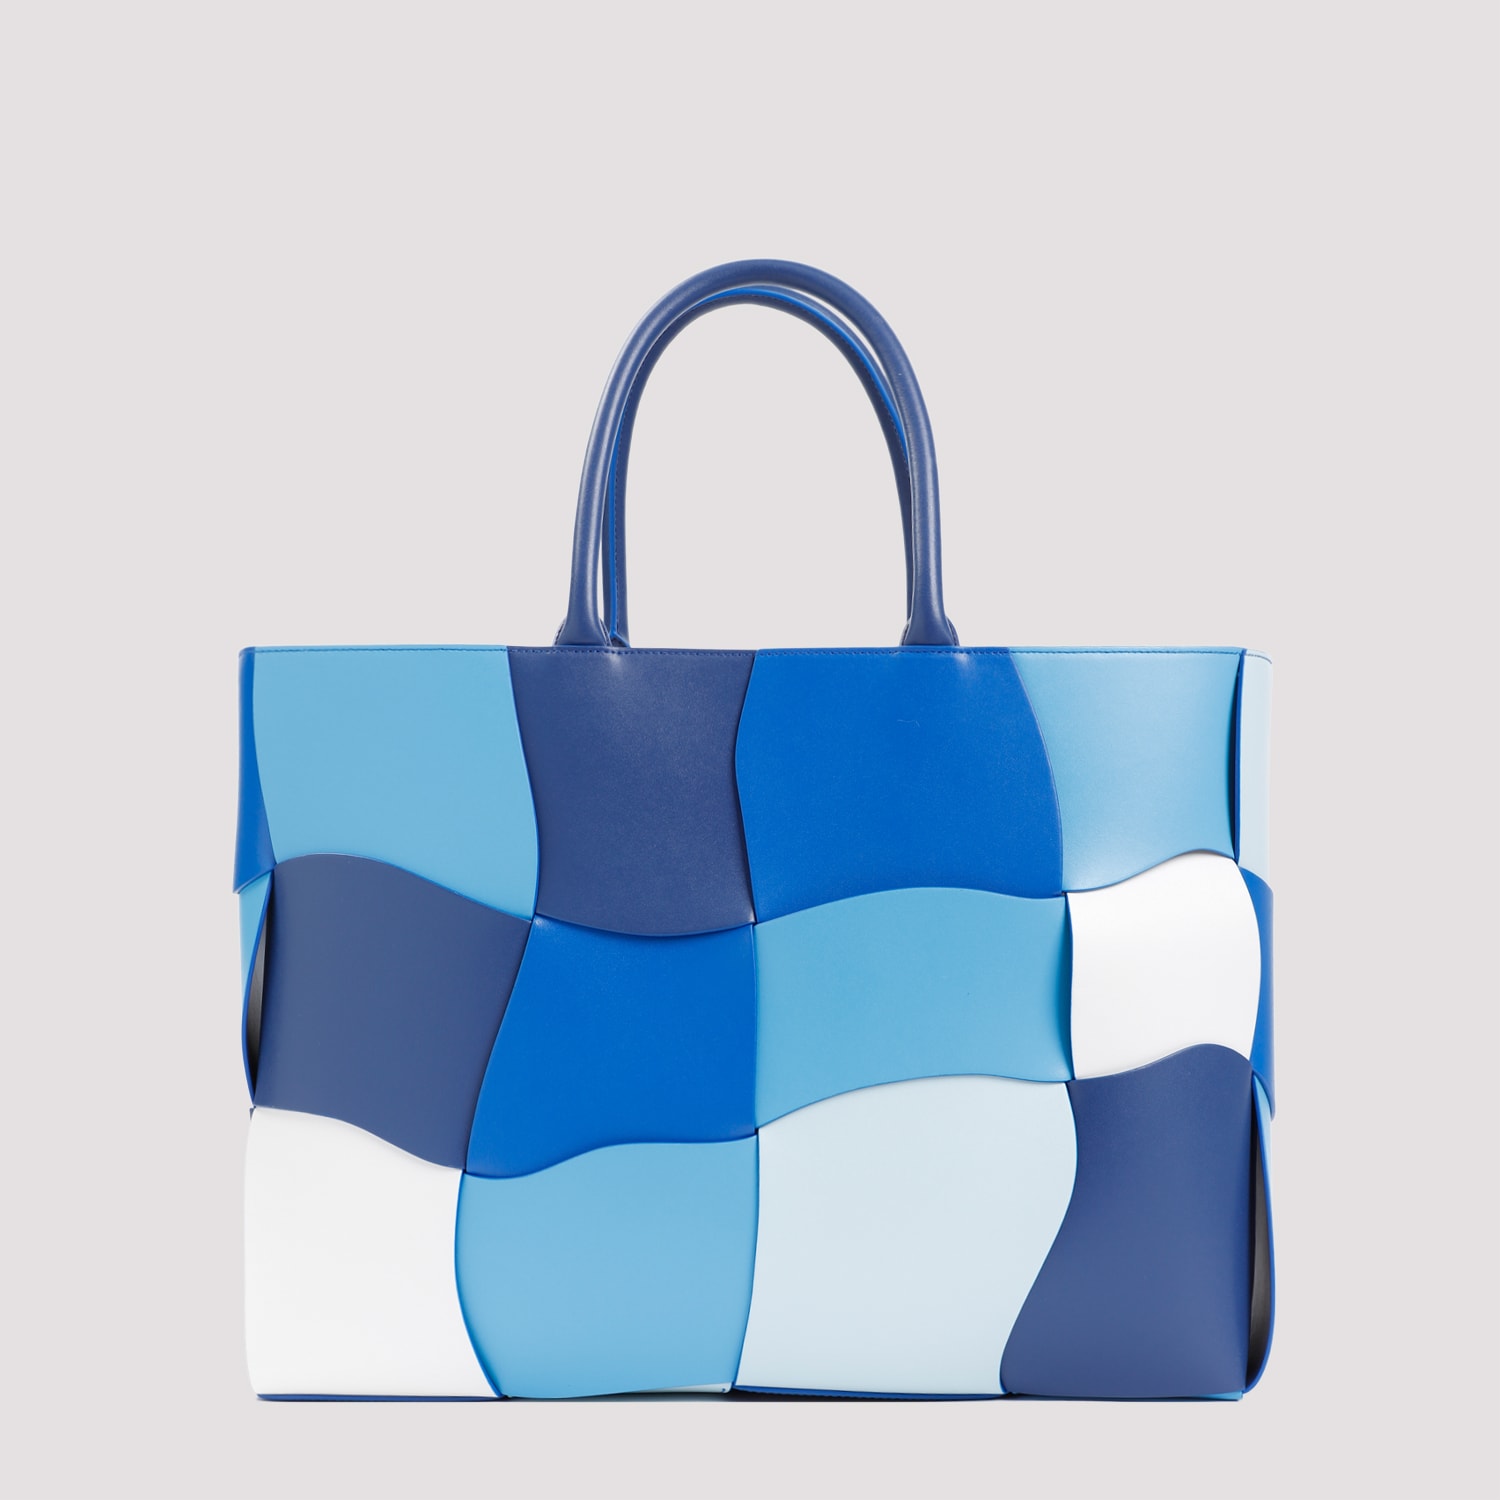 Distorted Arco Tote Bag